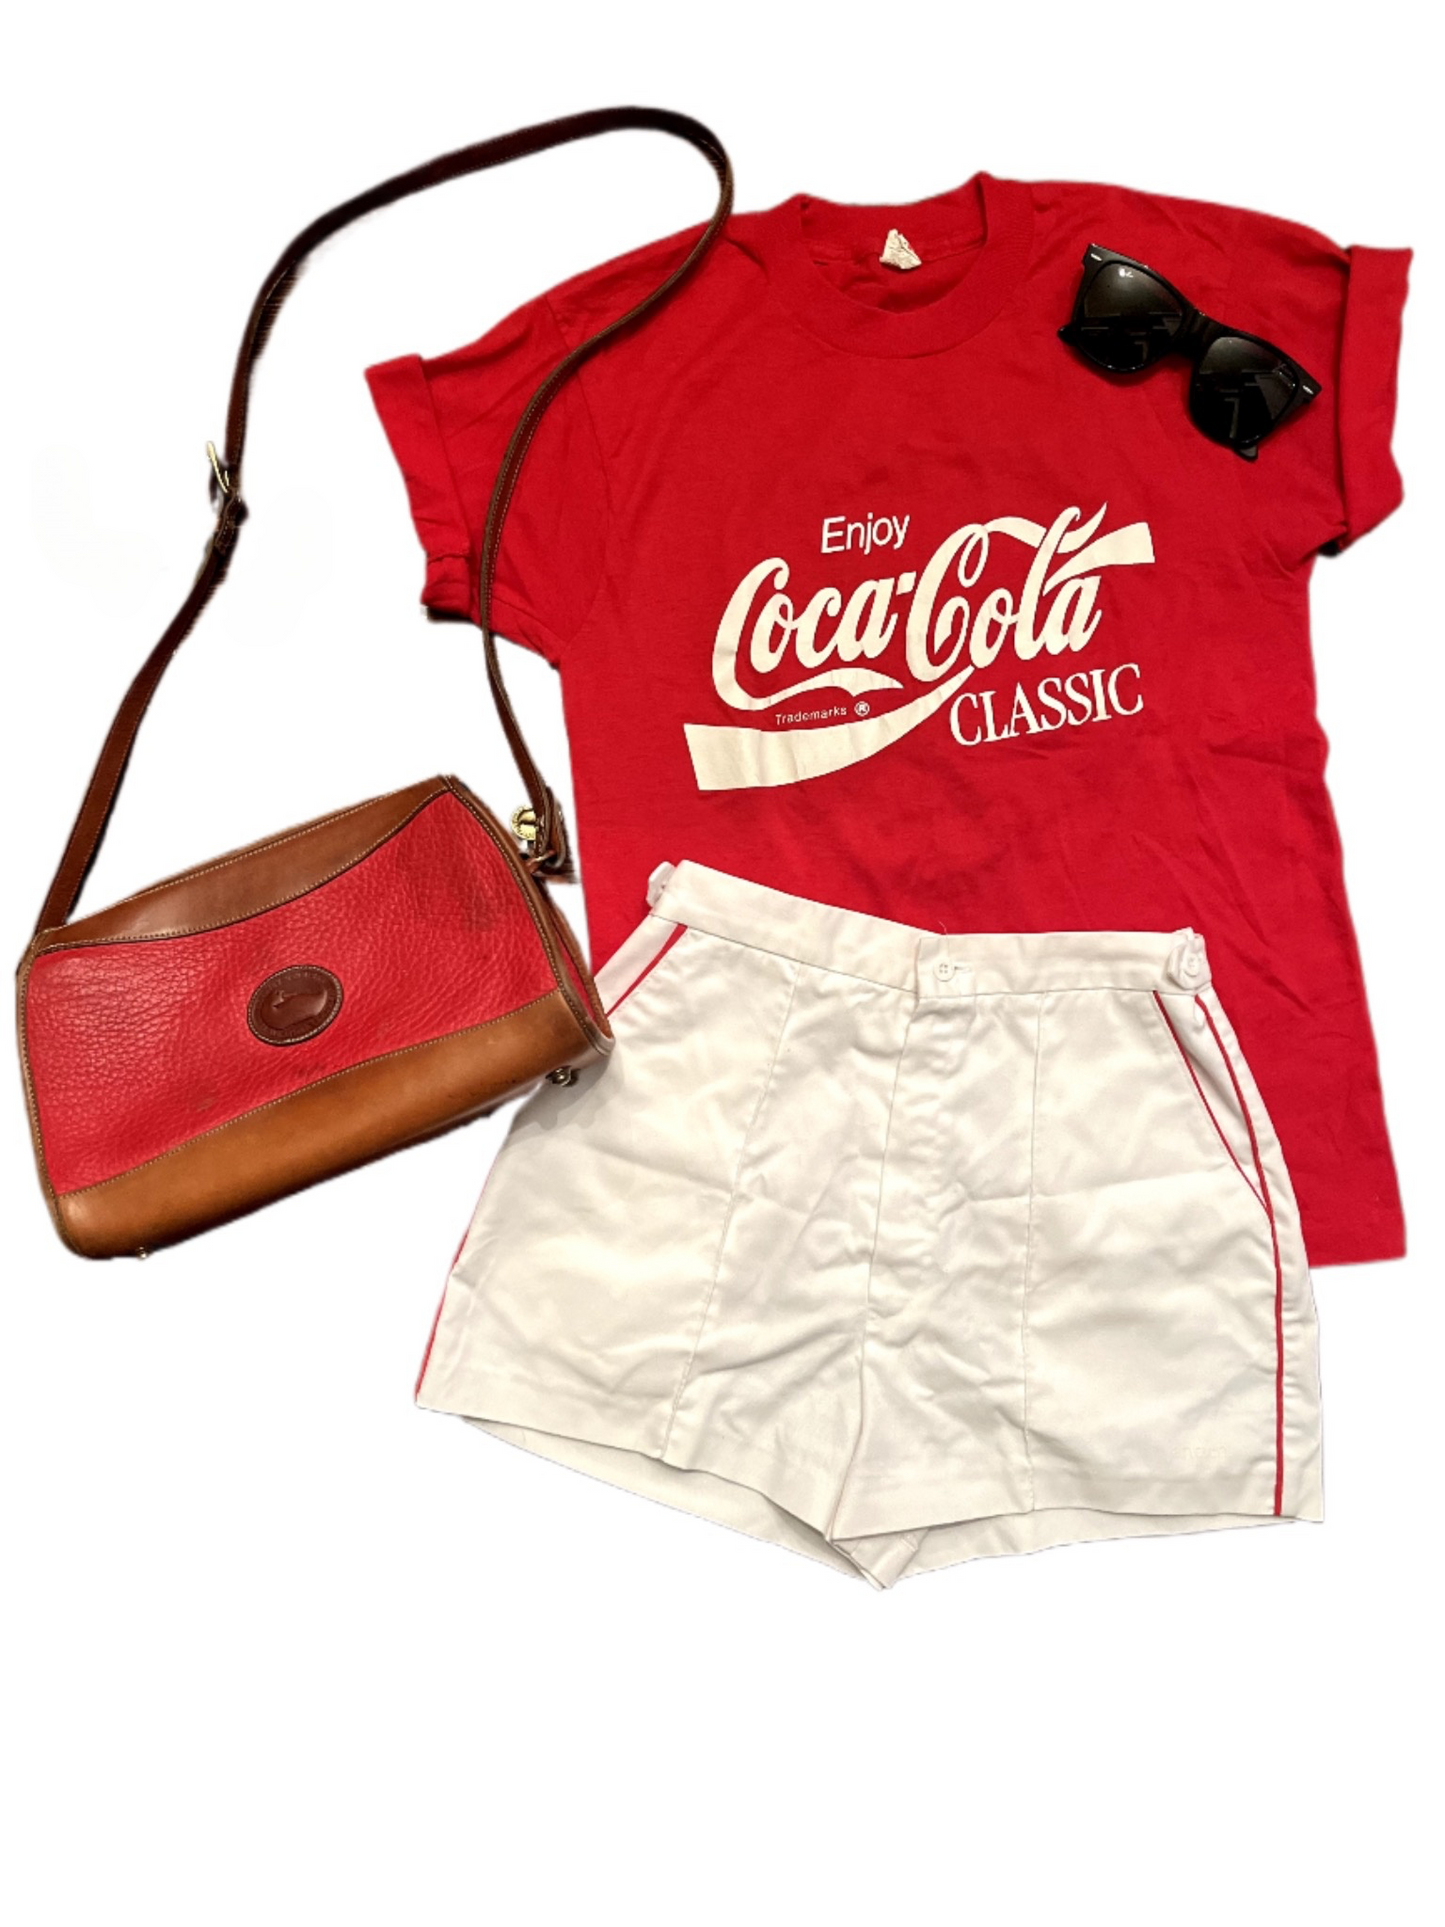 Lay down image of red Dooney and Bourke purse with red coca-cola tee, white shorts and sunglasses